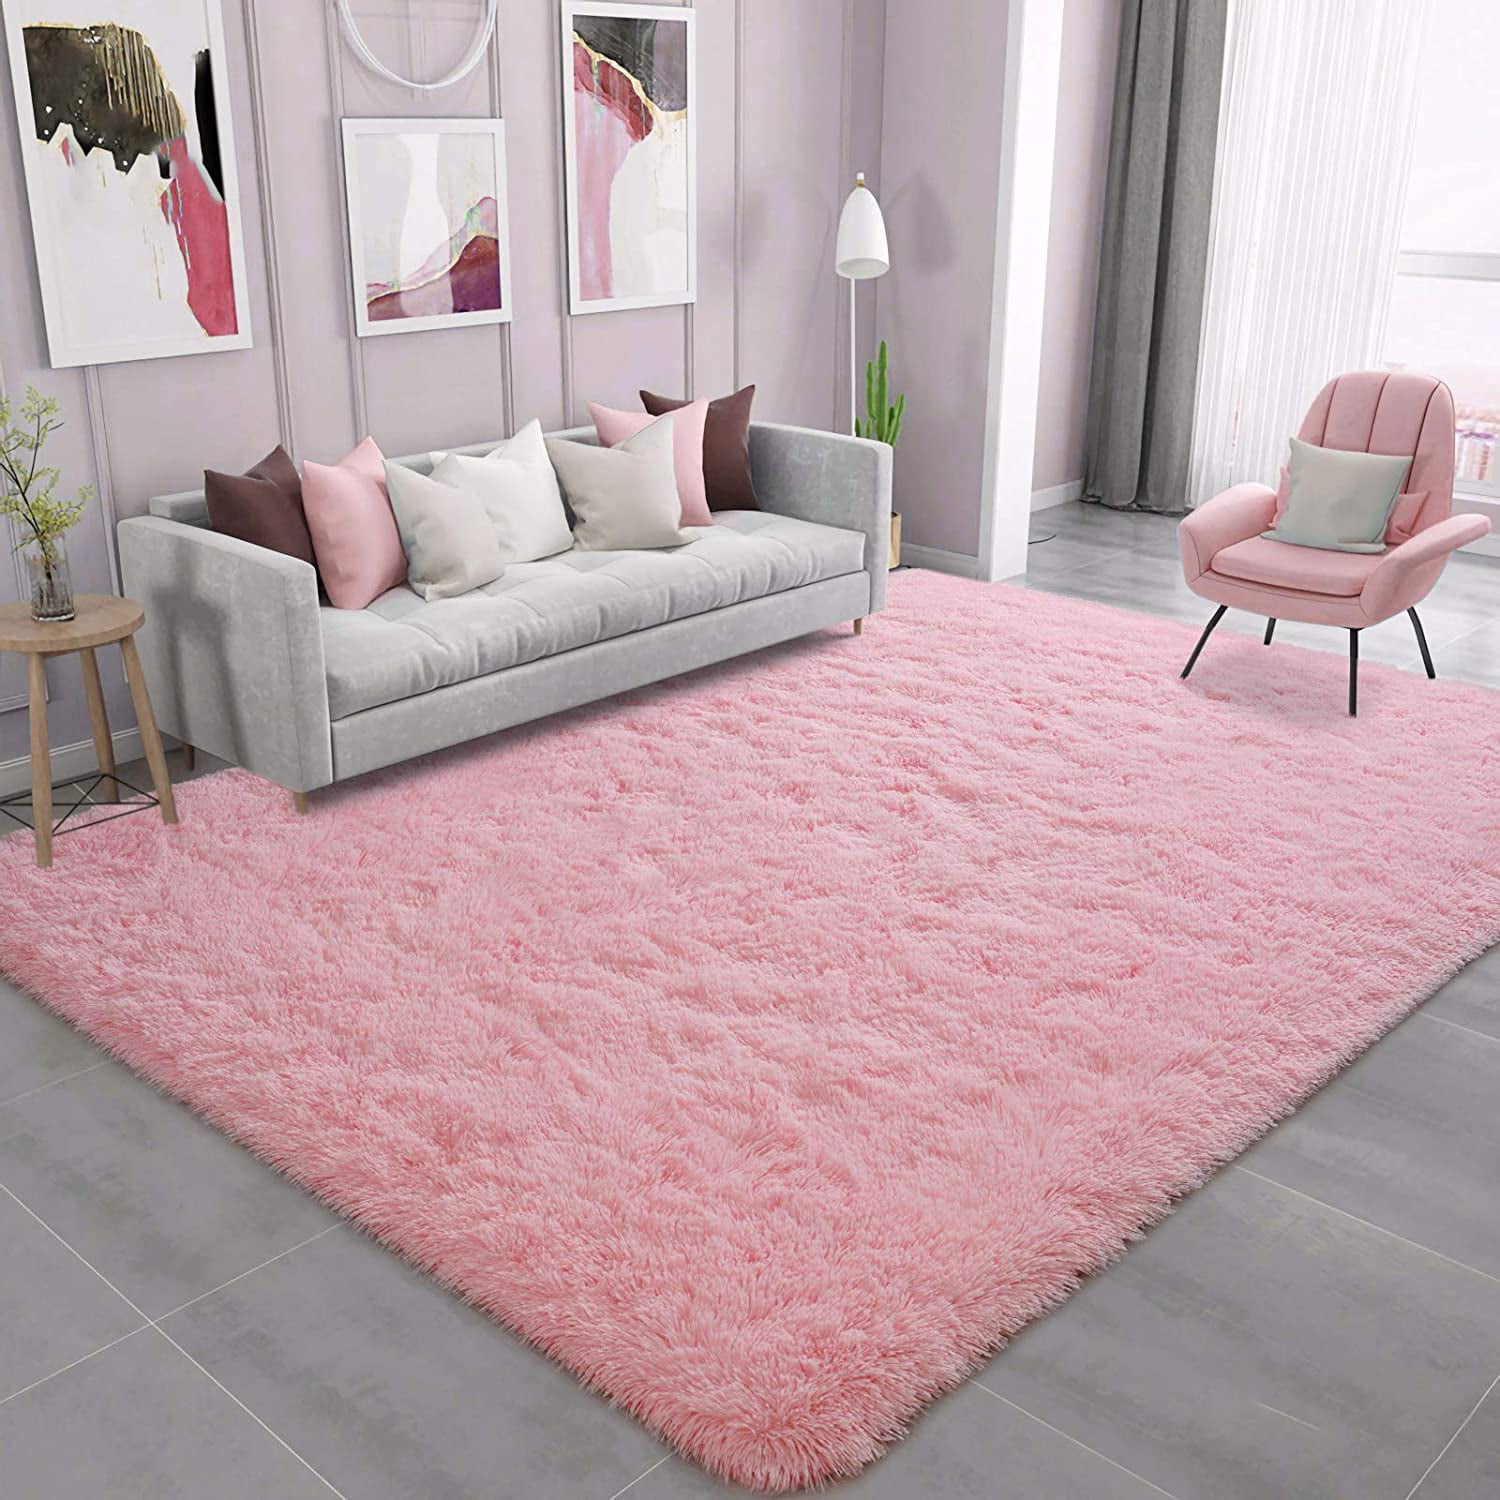 Hot Pink Mongolian Faux Fur Throw Area Rugs Accents Home Decor Nursery Rug 